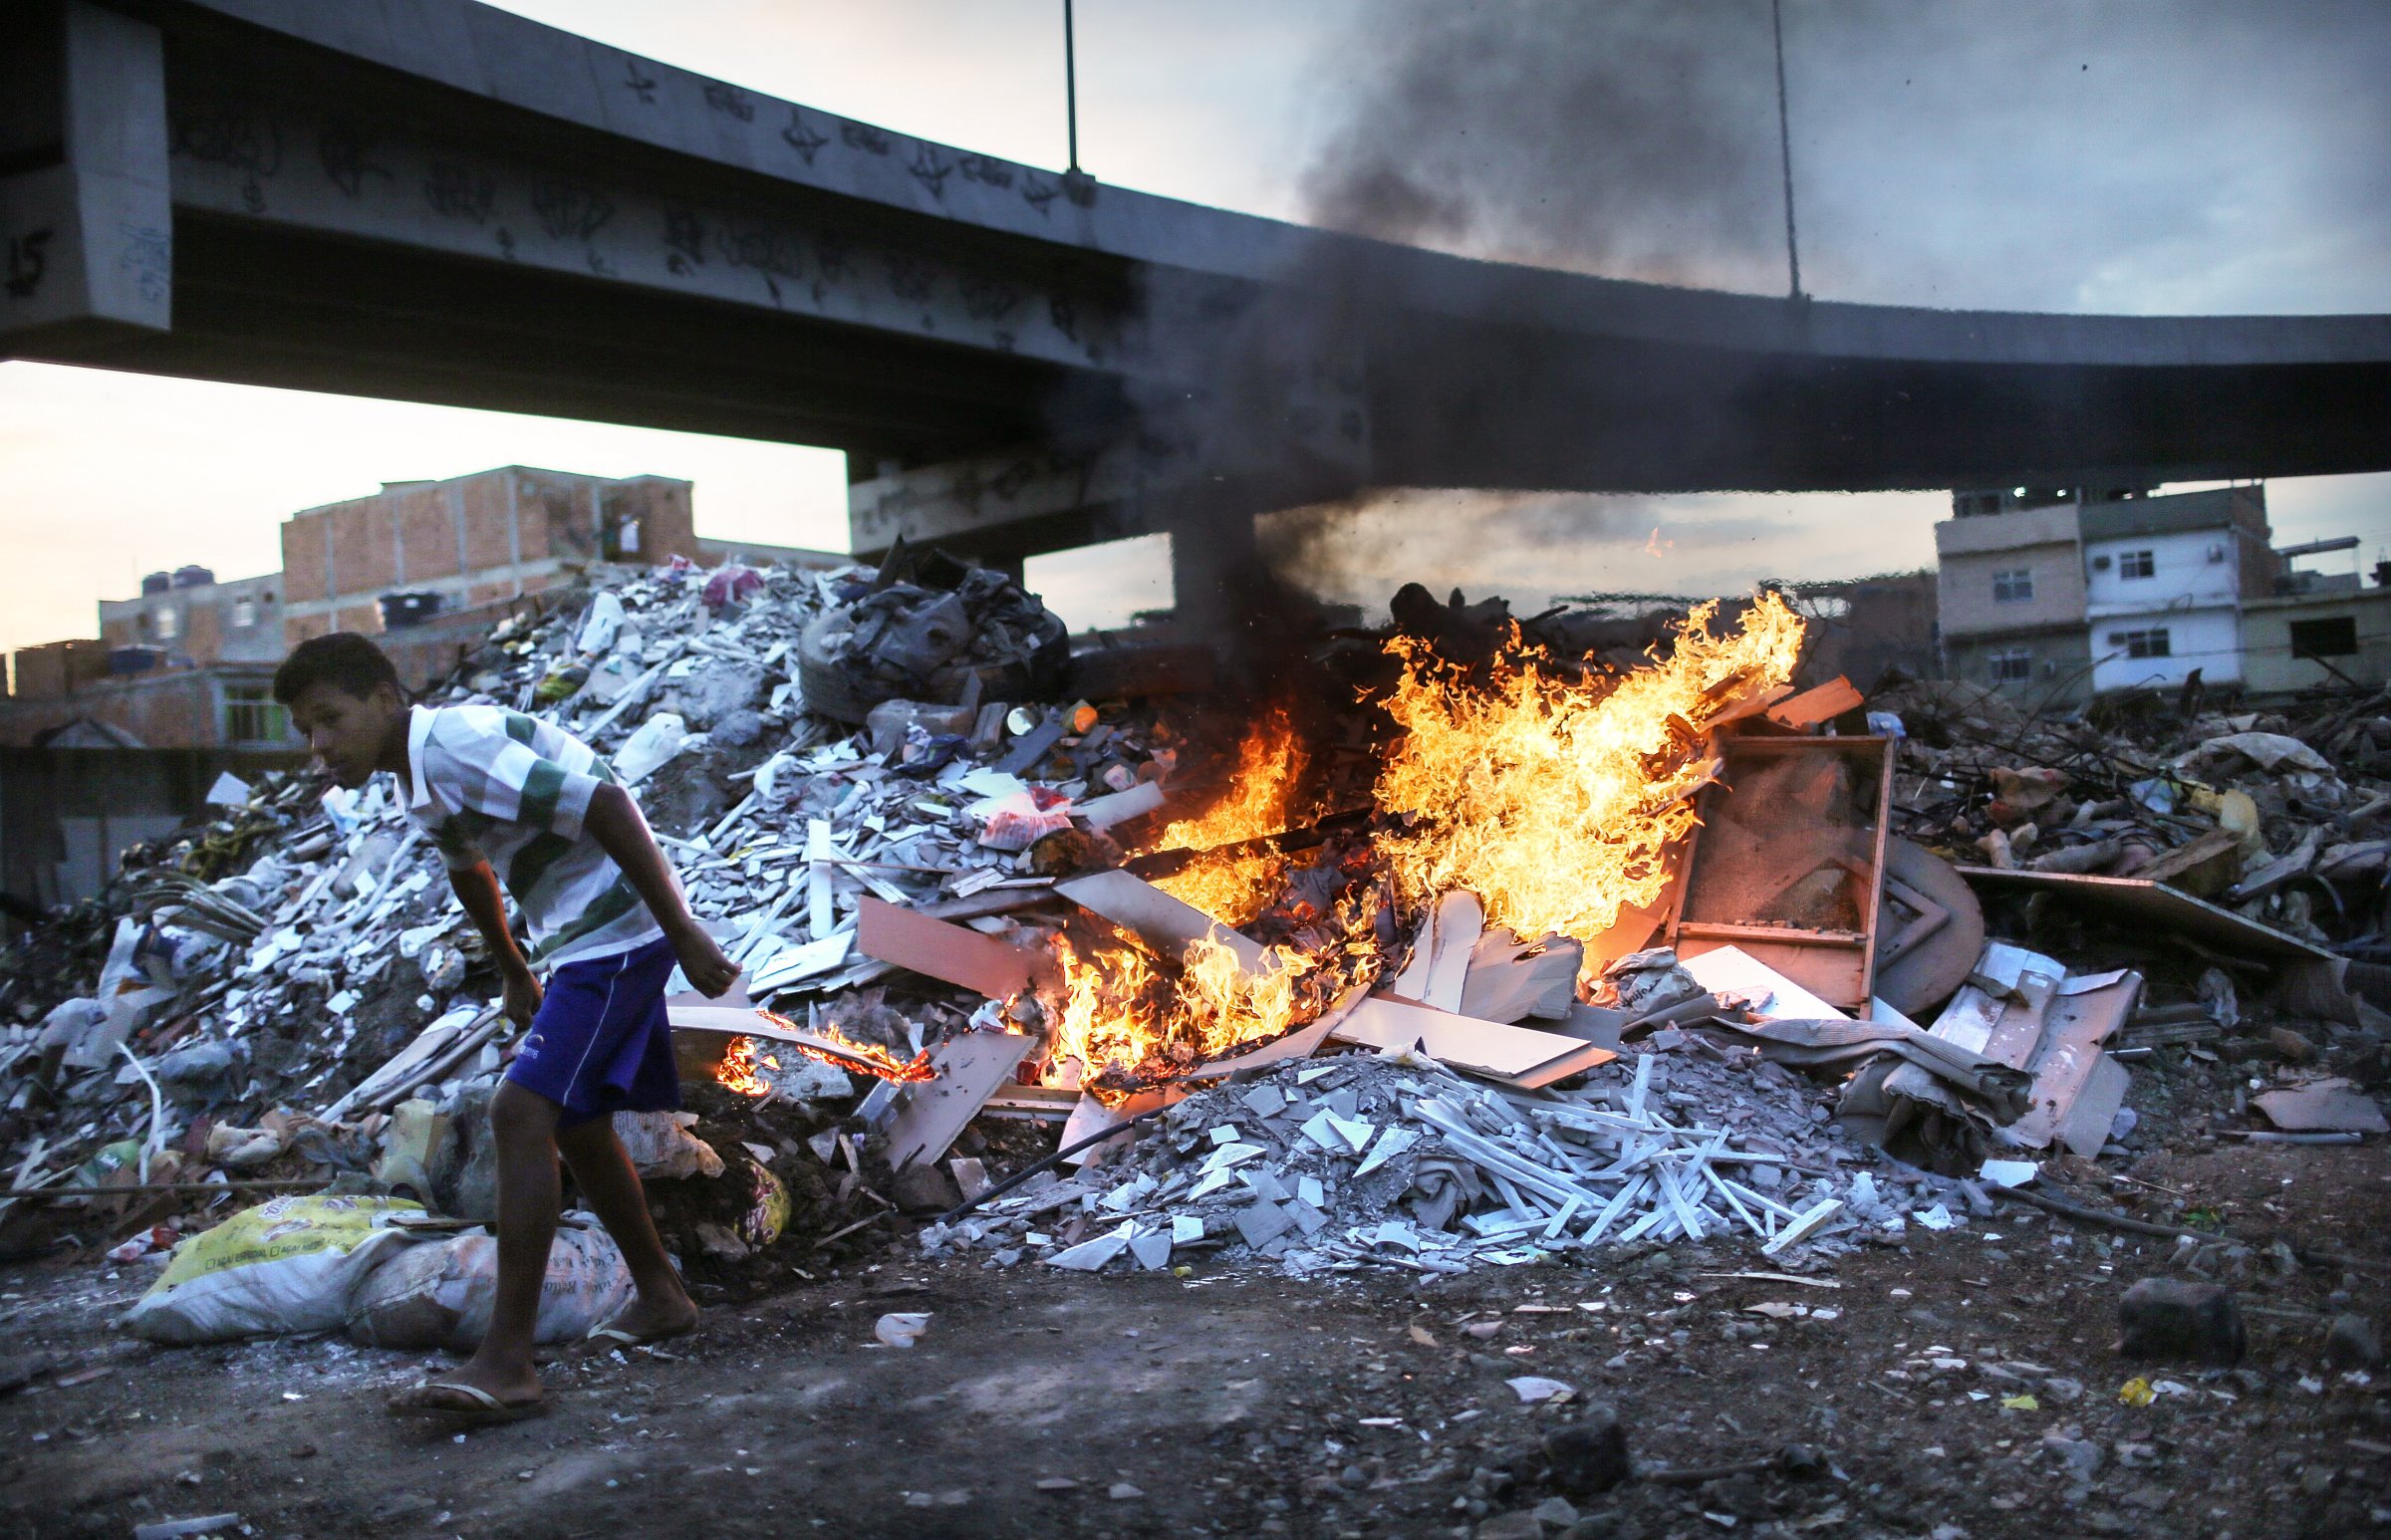 Trash is burned in an area where garbage is dumped near the main highway linking Rio's international airport to the city in the Mare favela community complex in Rio de Janeiro on July 18, 2016.